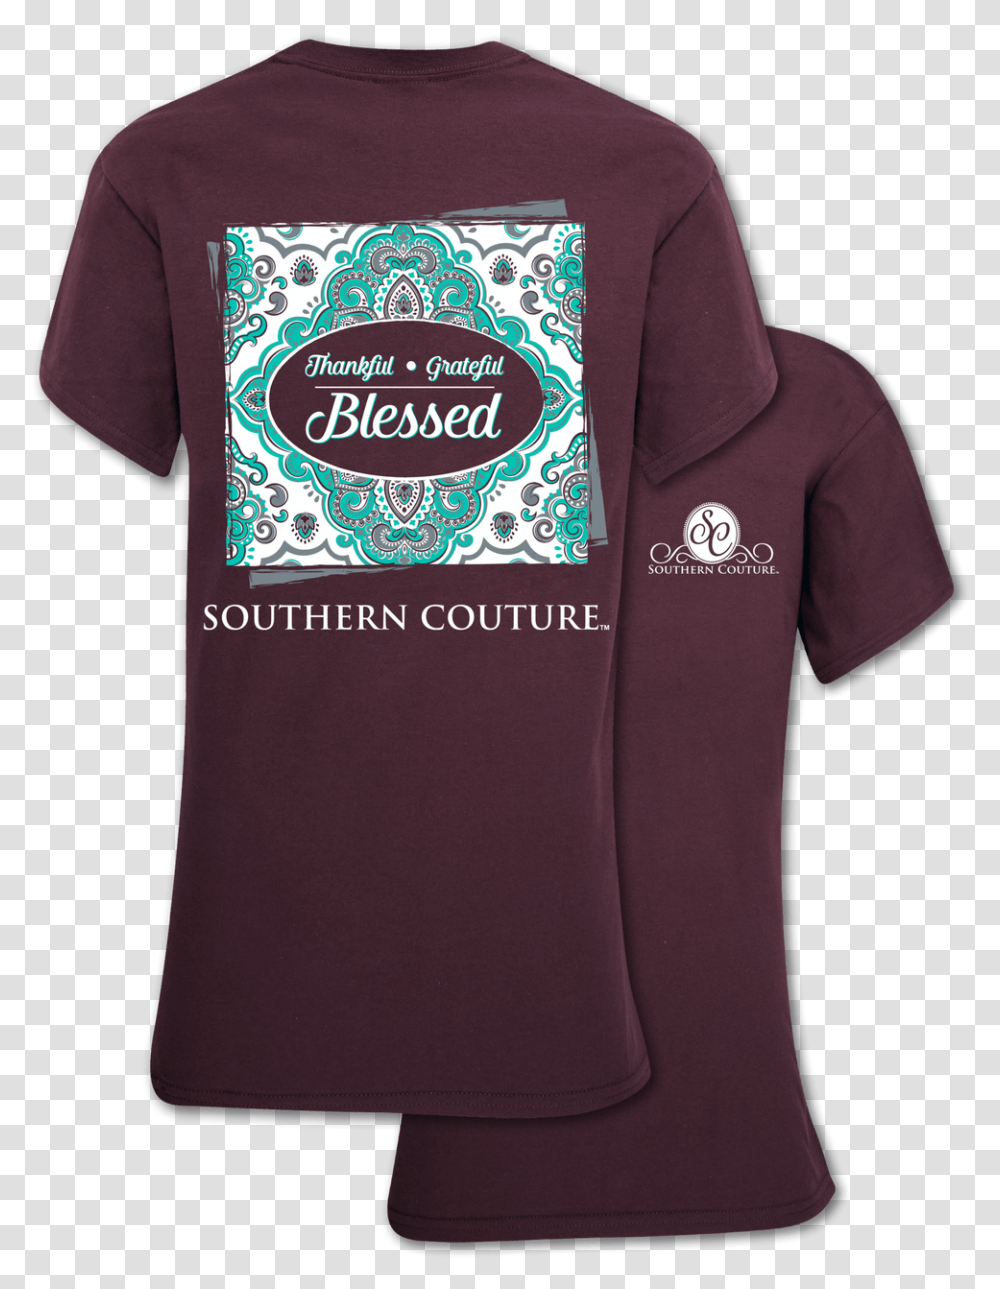 Southern Couture Thankful Grateful Blessed Southern Couture, Apparel, Sweatshirt, Sweater Transparent Png